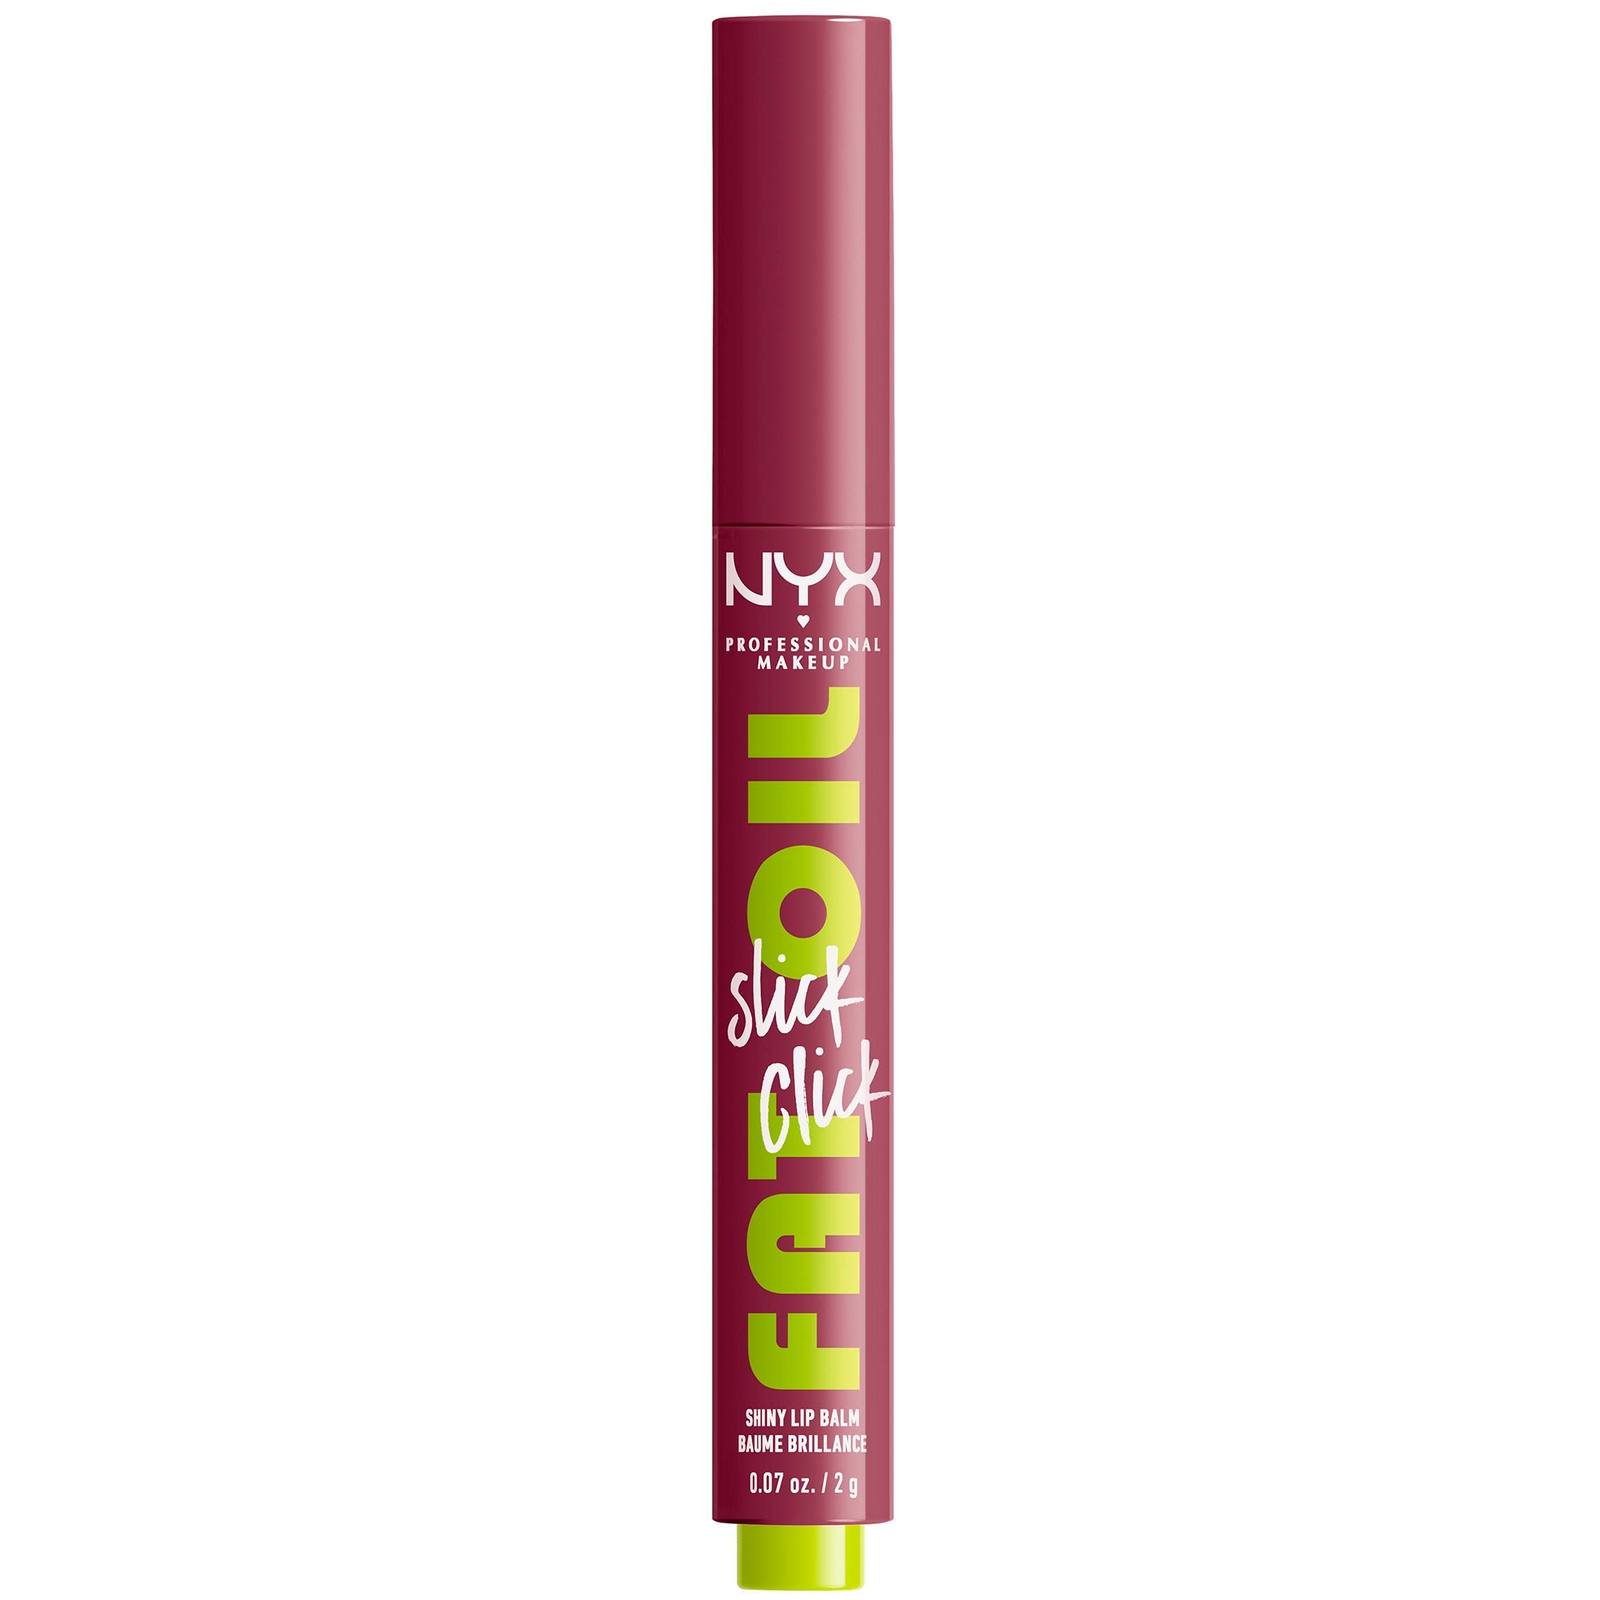 Nyx Professional Makeup Fat Oil Slick Click Lip Balm 2ml (various Shades) - That's Major In White